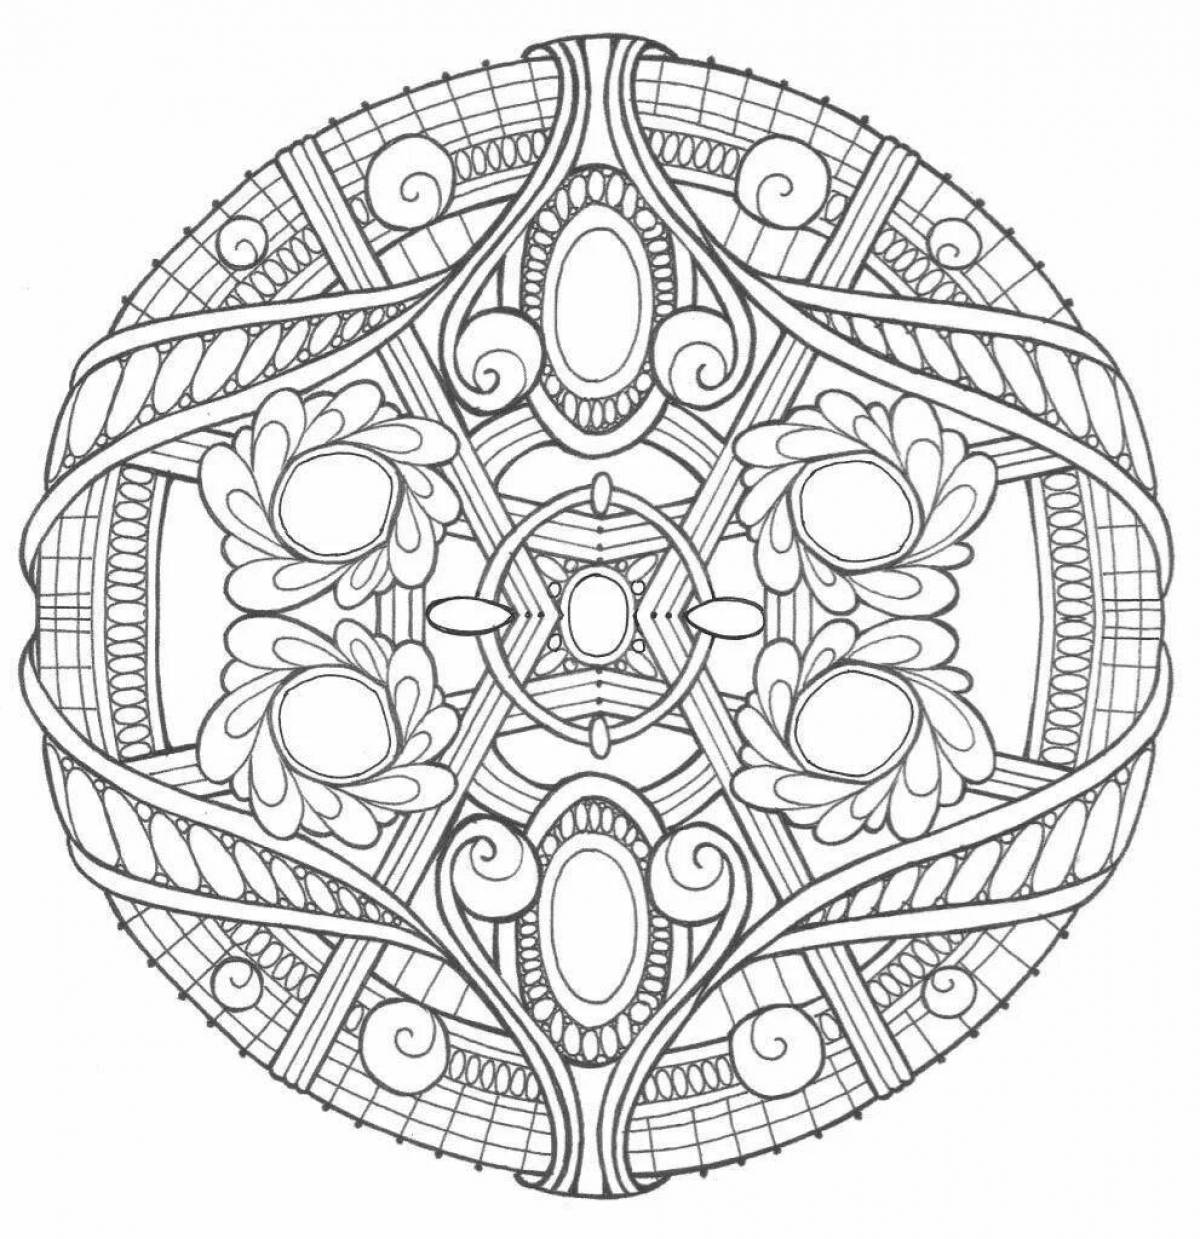 Blissful coloring book for meditation and relaxation